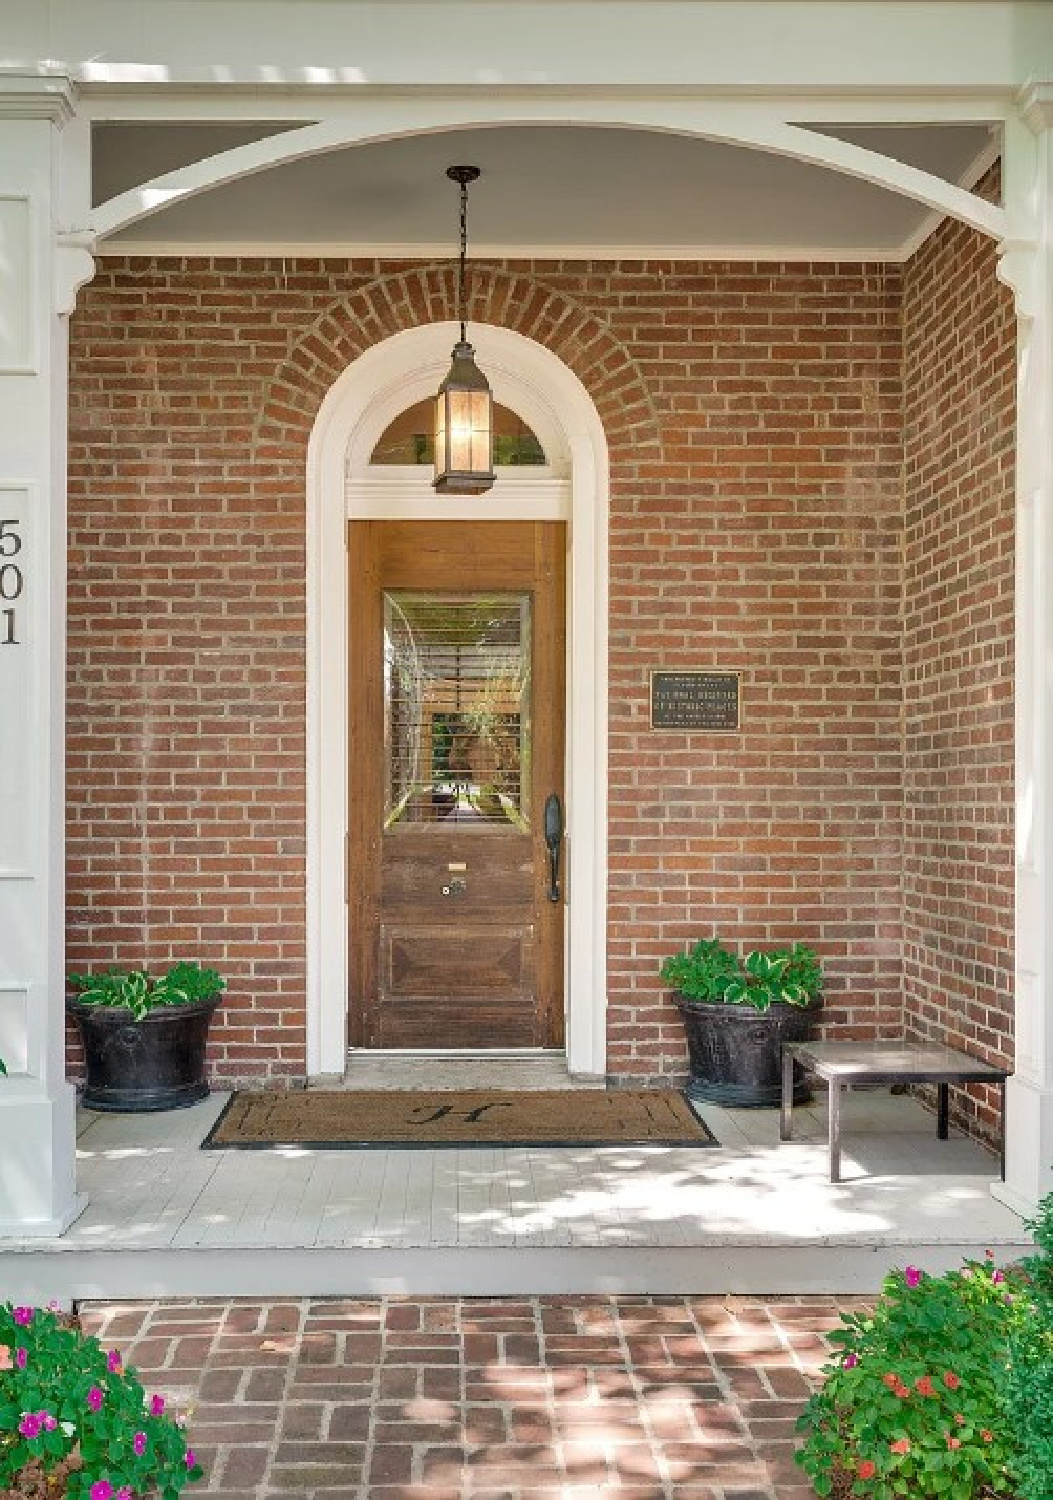 1870 historic red brick home with porches and arched windows - Murfreesboro Rd. in Franklin, TN.